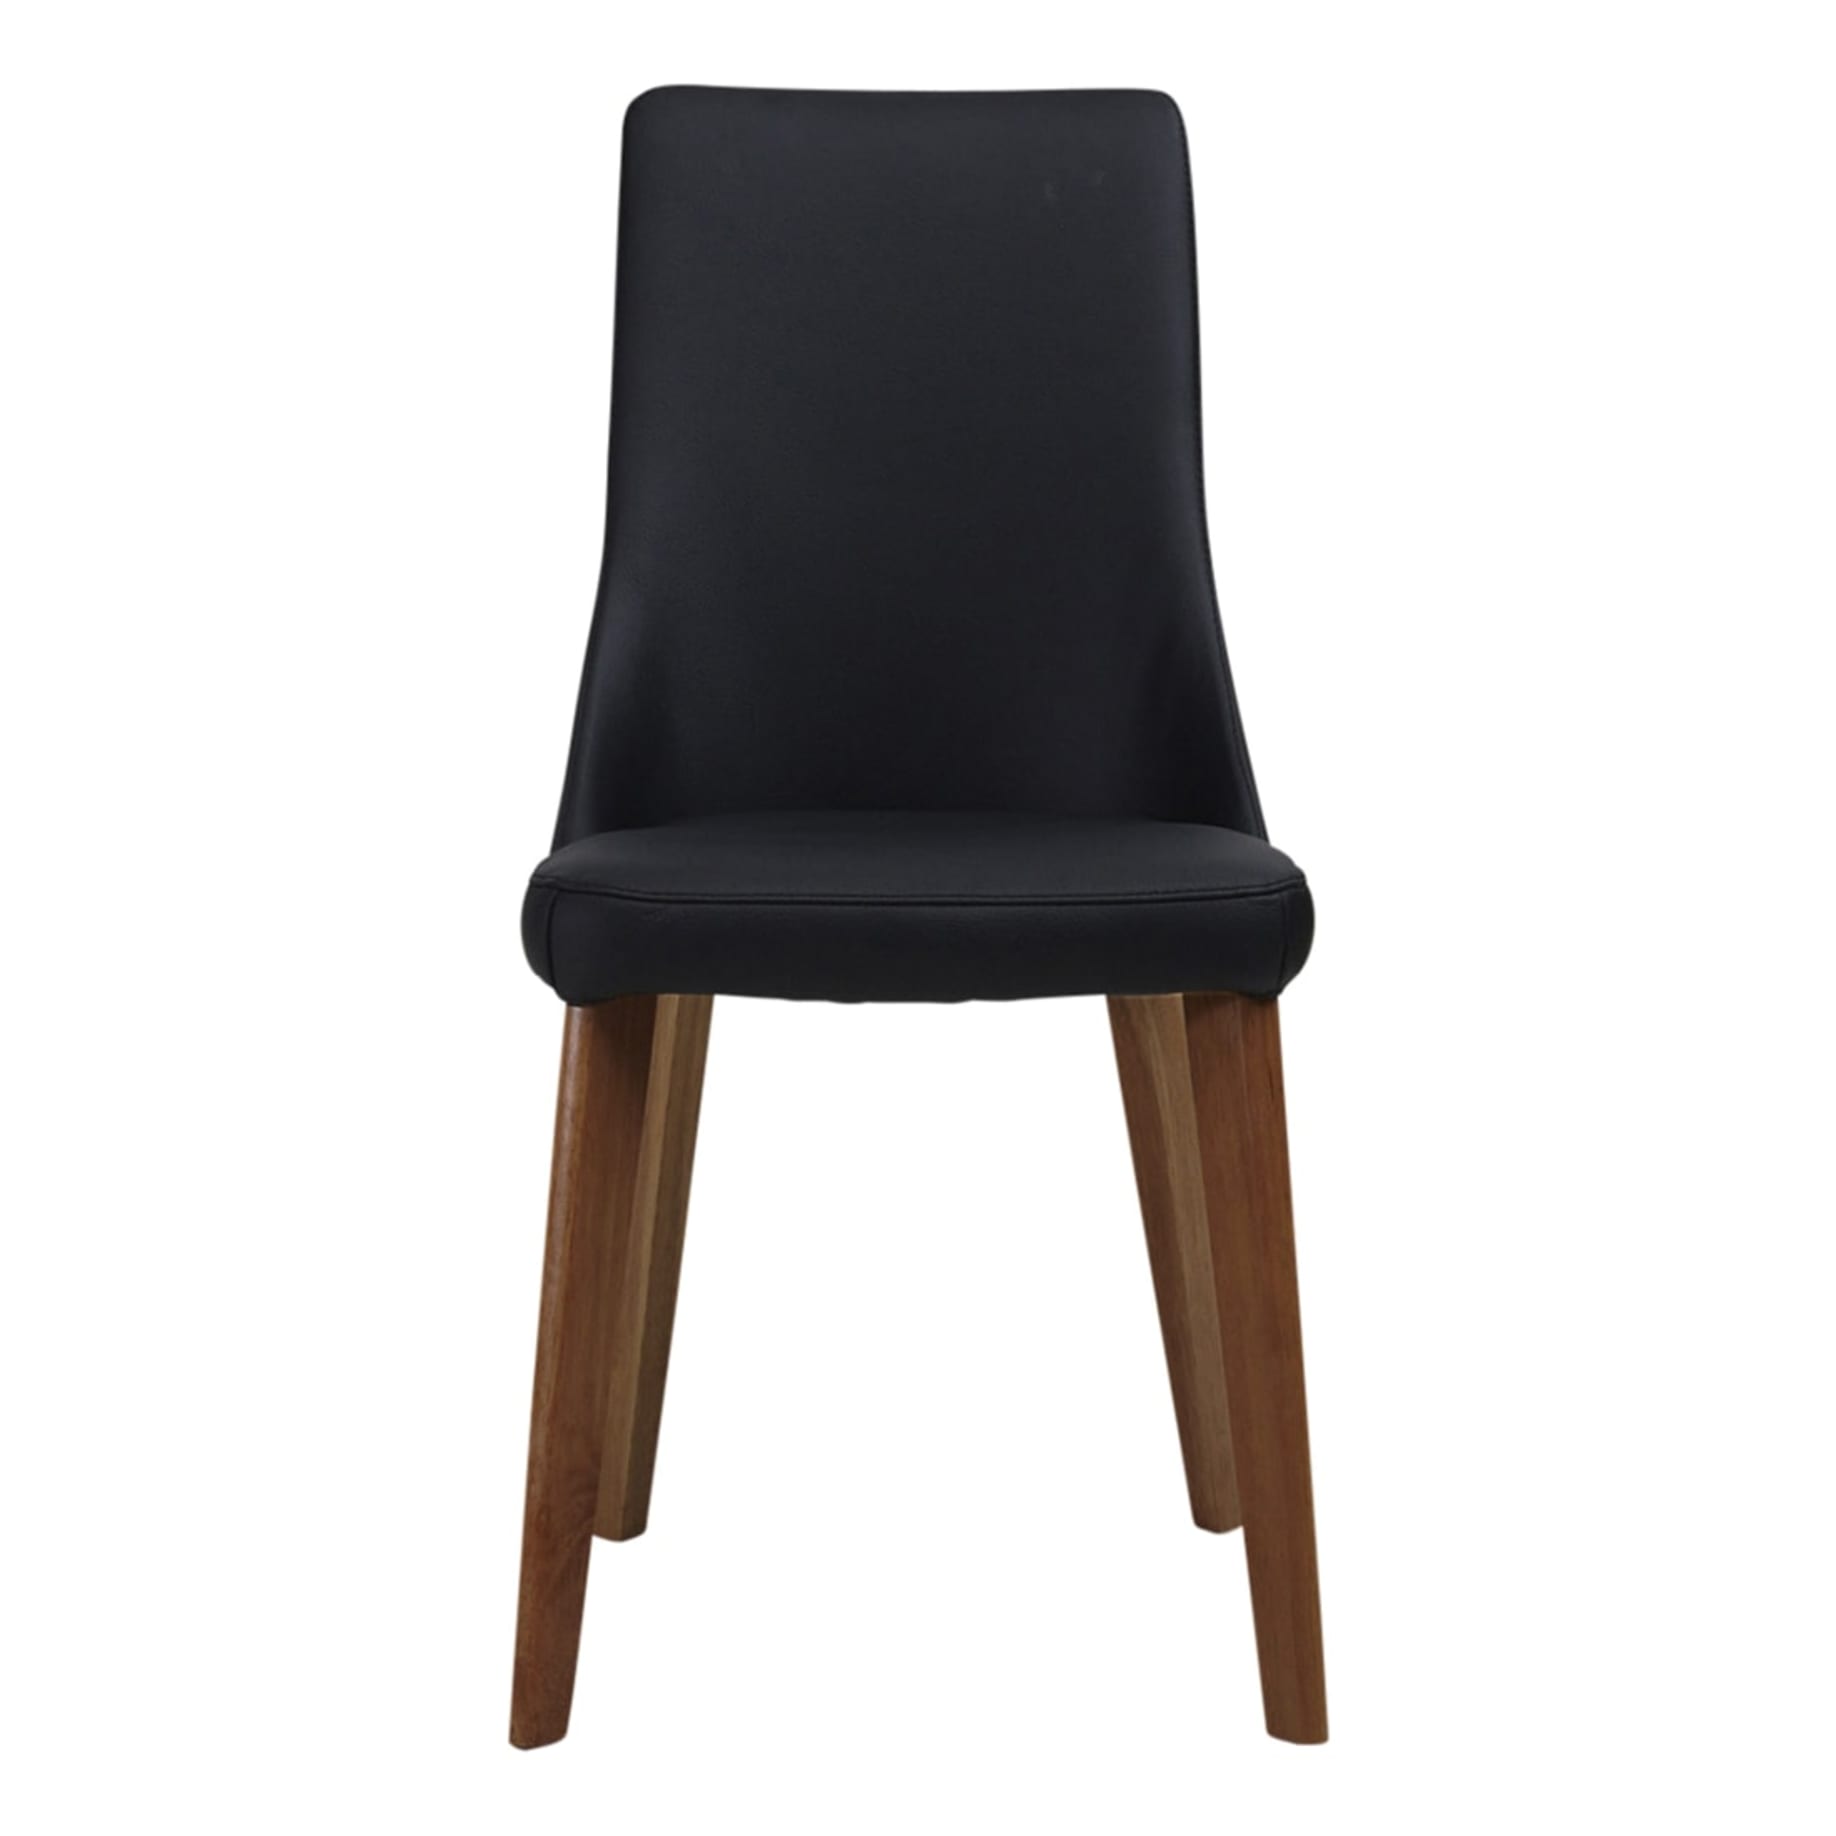 Panama Dining Chair in Black / Blackwood Stain